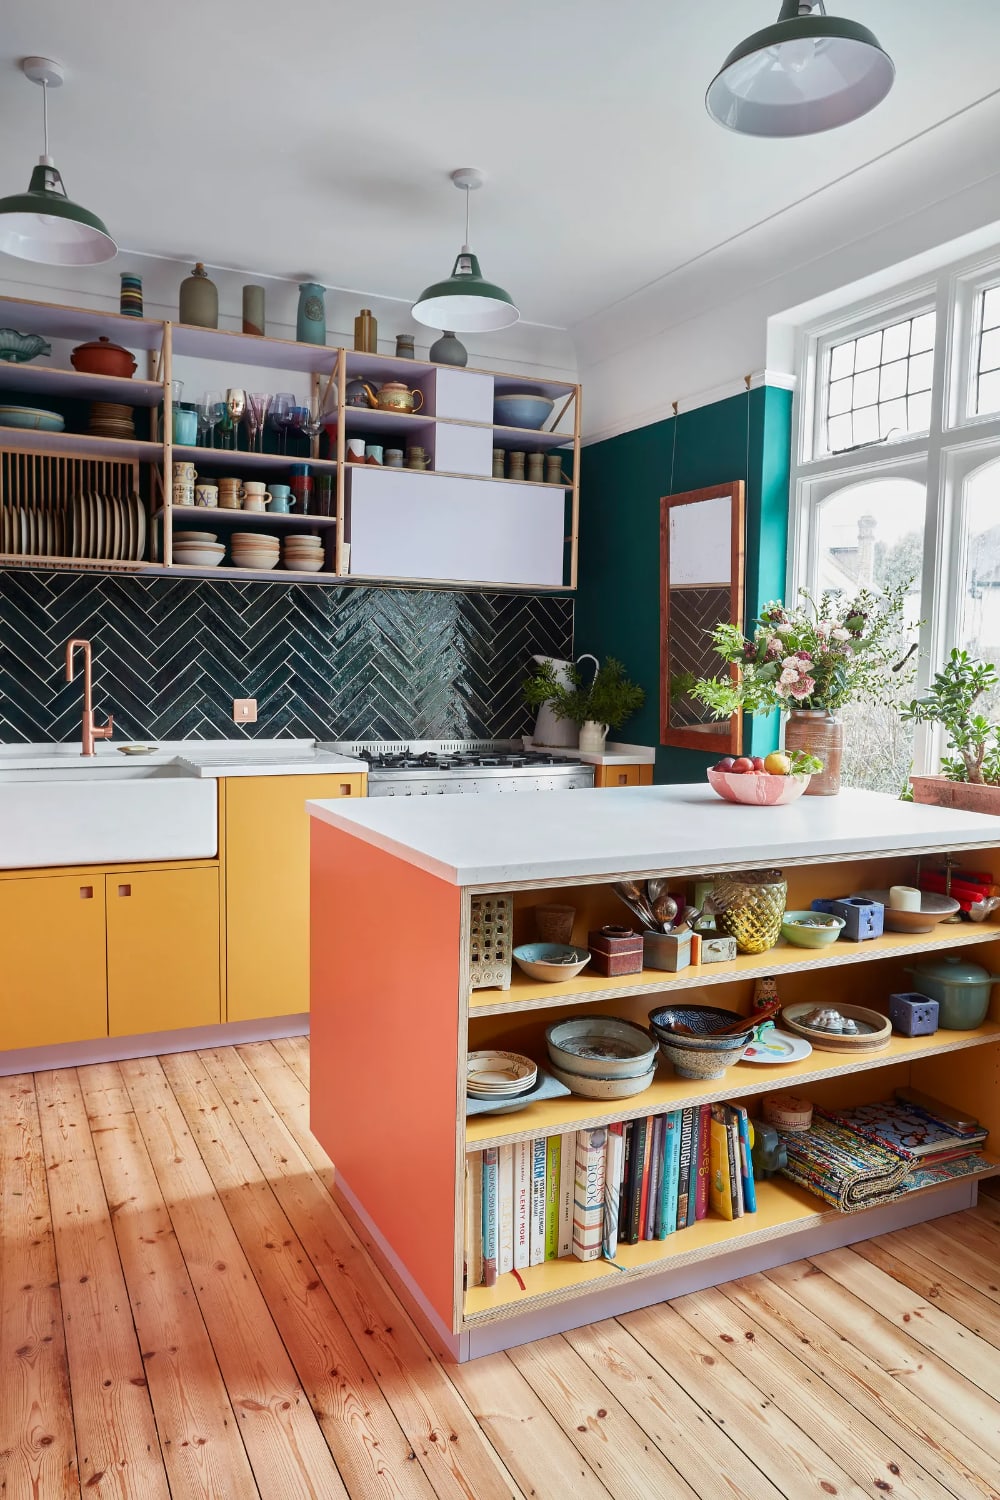 This Vibrant London Kitchen Is a Rainbow-Hued Delight